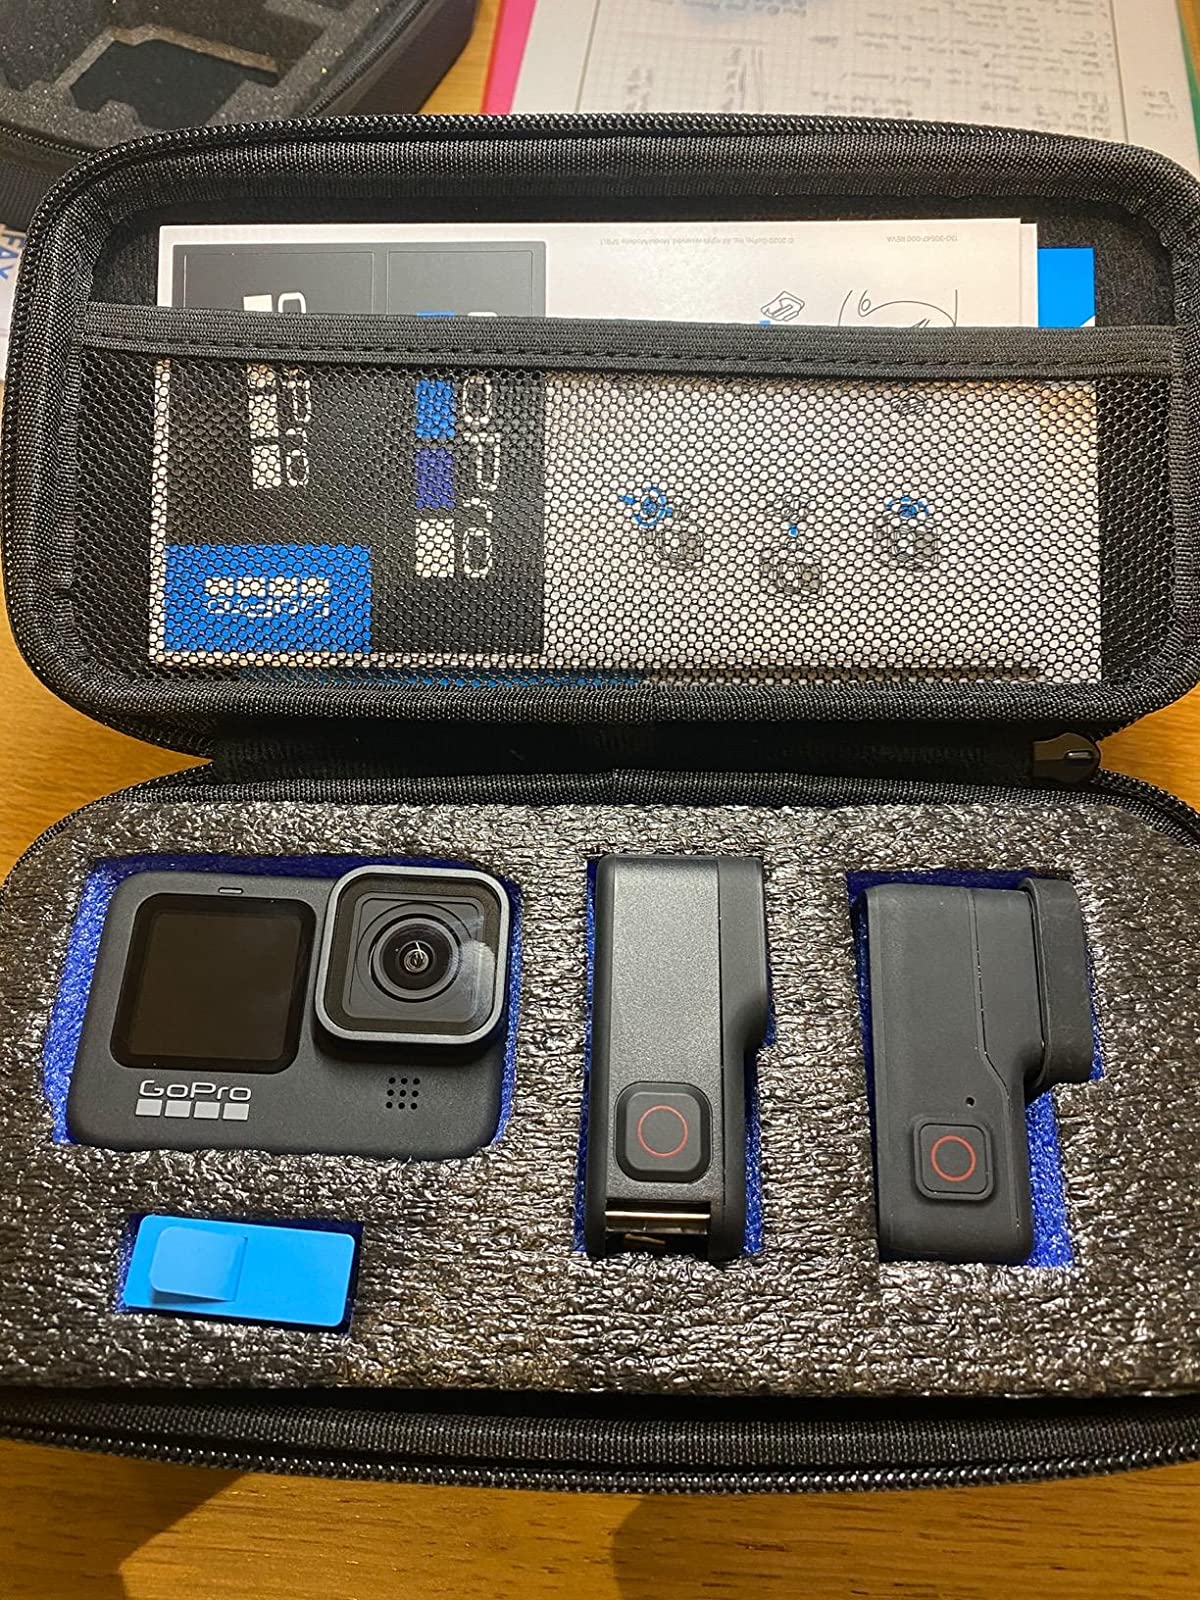 the perfect compact gopro storage case from Shadow Foam customer Tricky